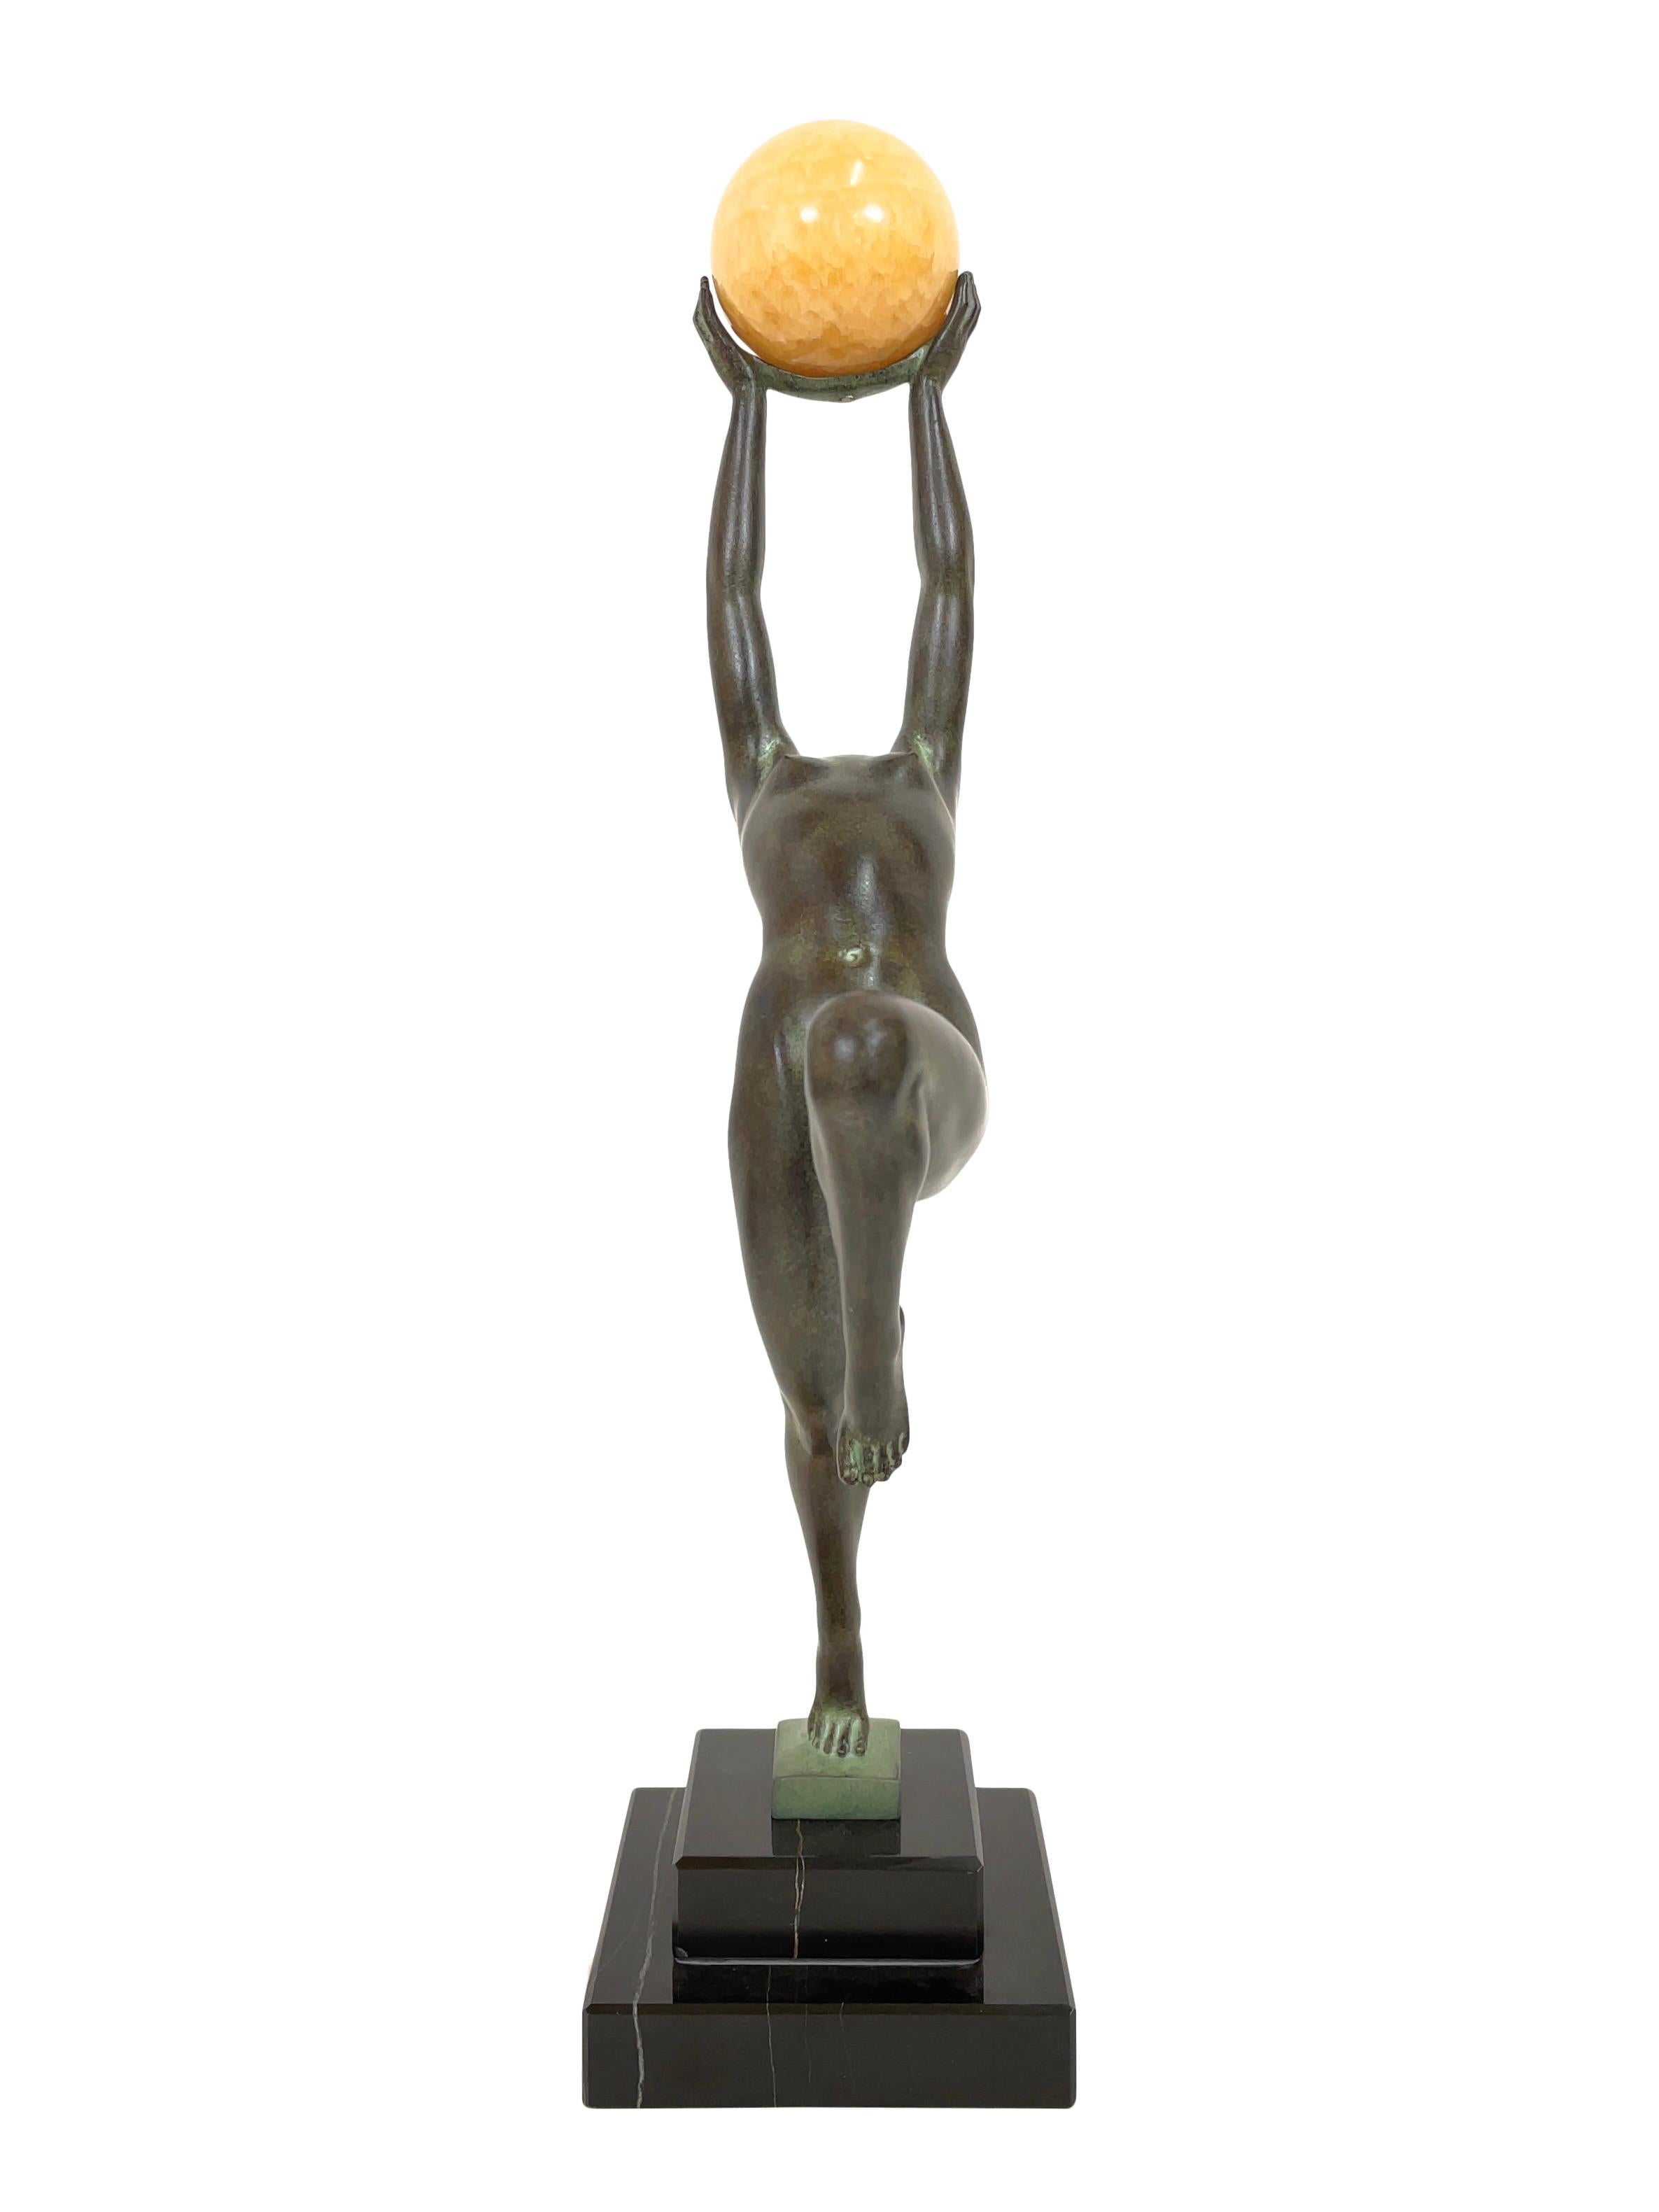 Patinated Jeu Sculpture in Spelter with an Onyx Ball from Max Le Verrier in Art Deco Style